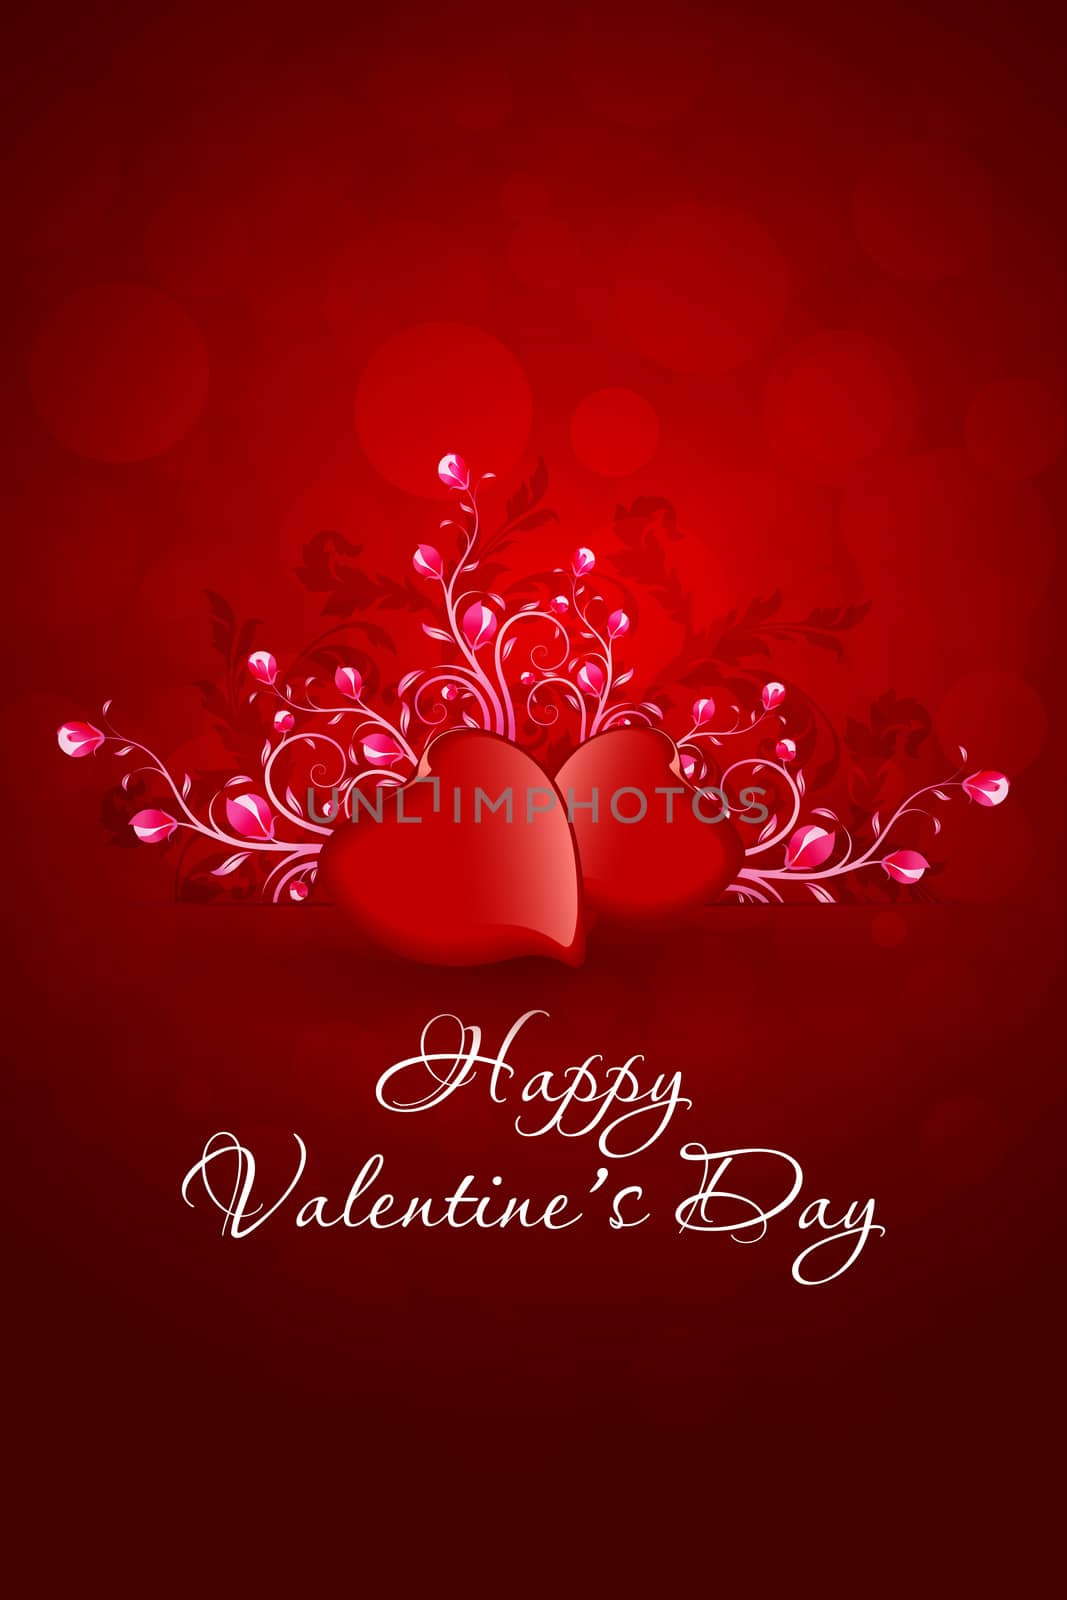 Valentines Day Greeting Card in Red Color